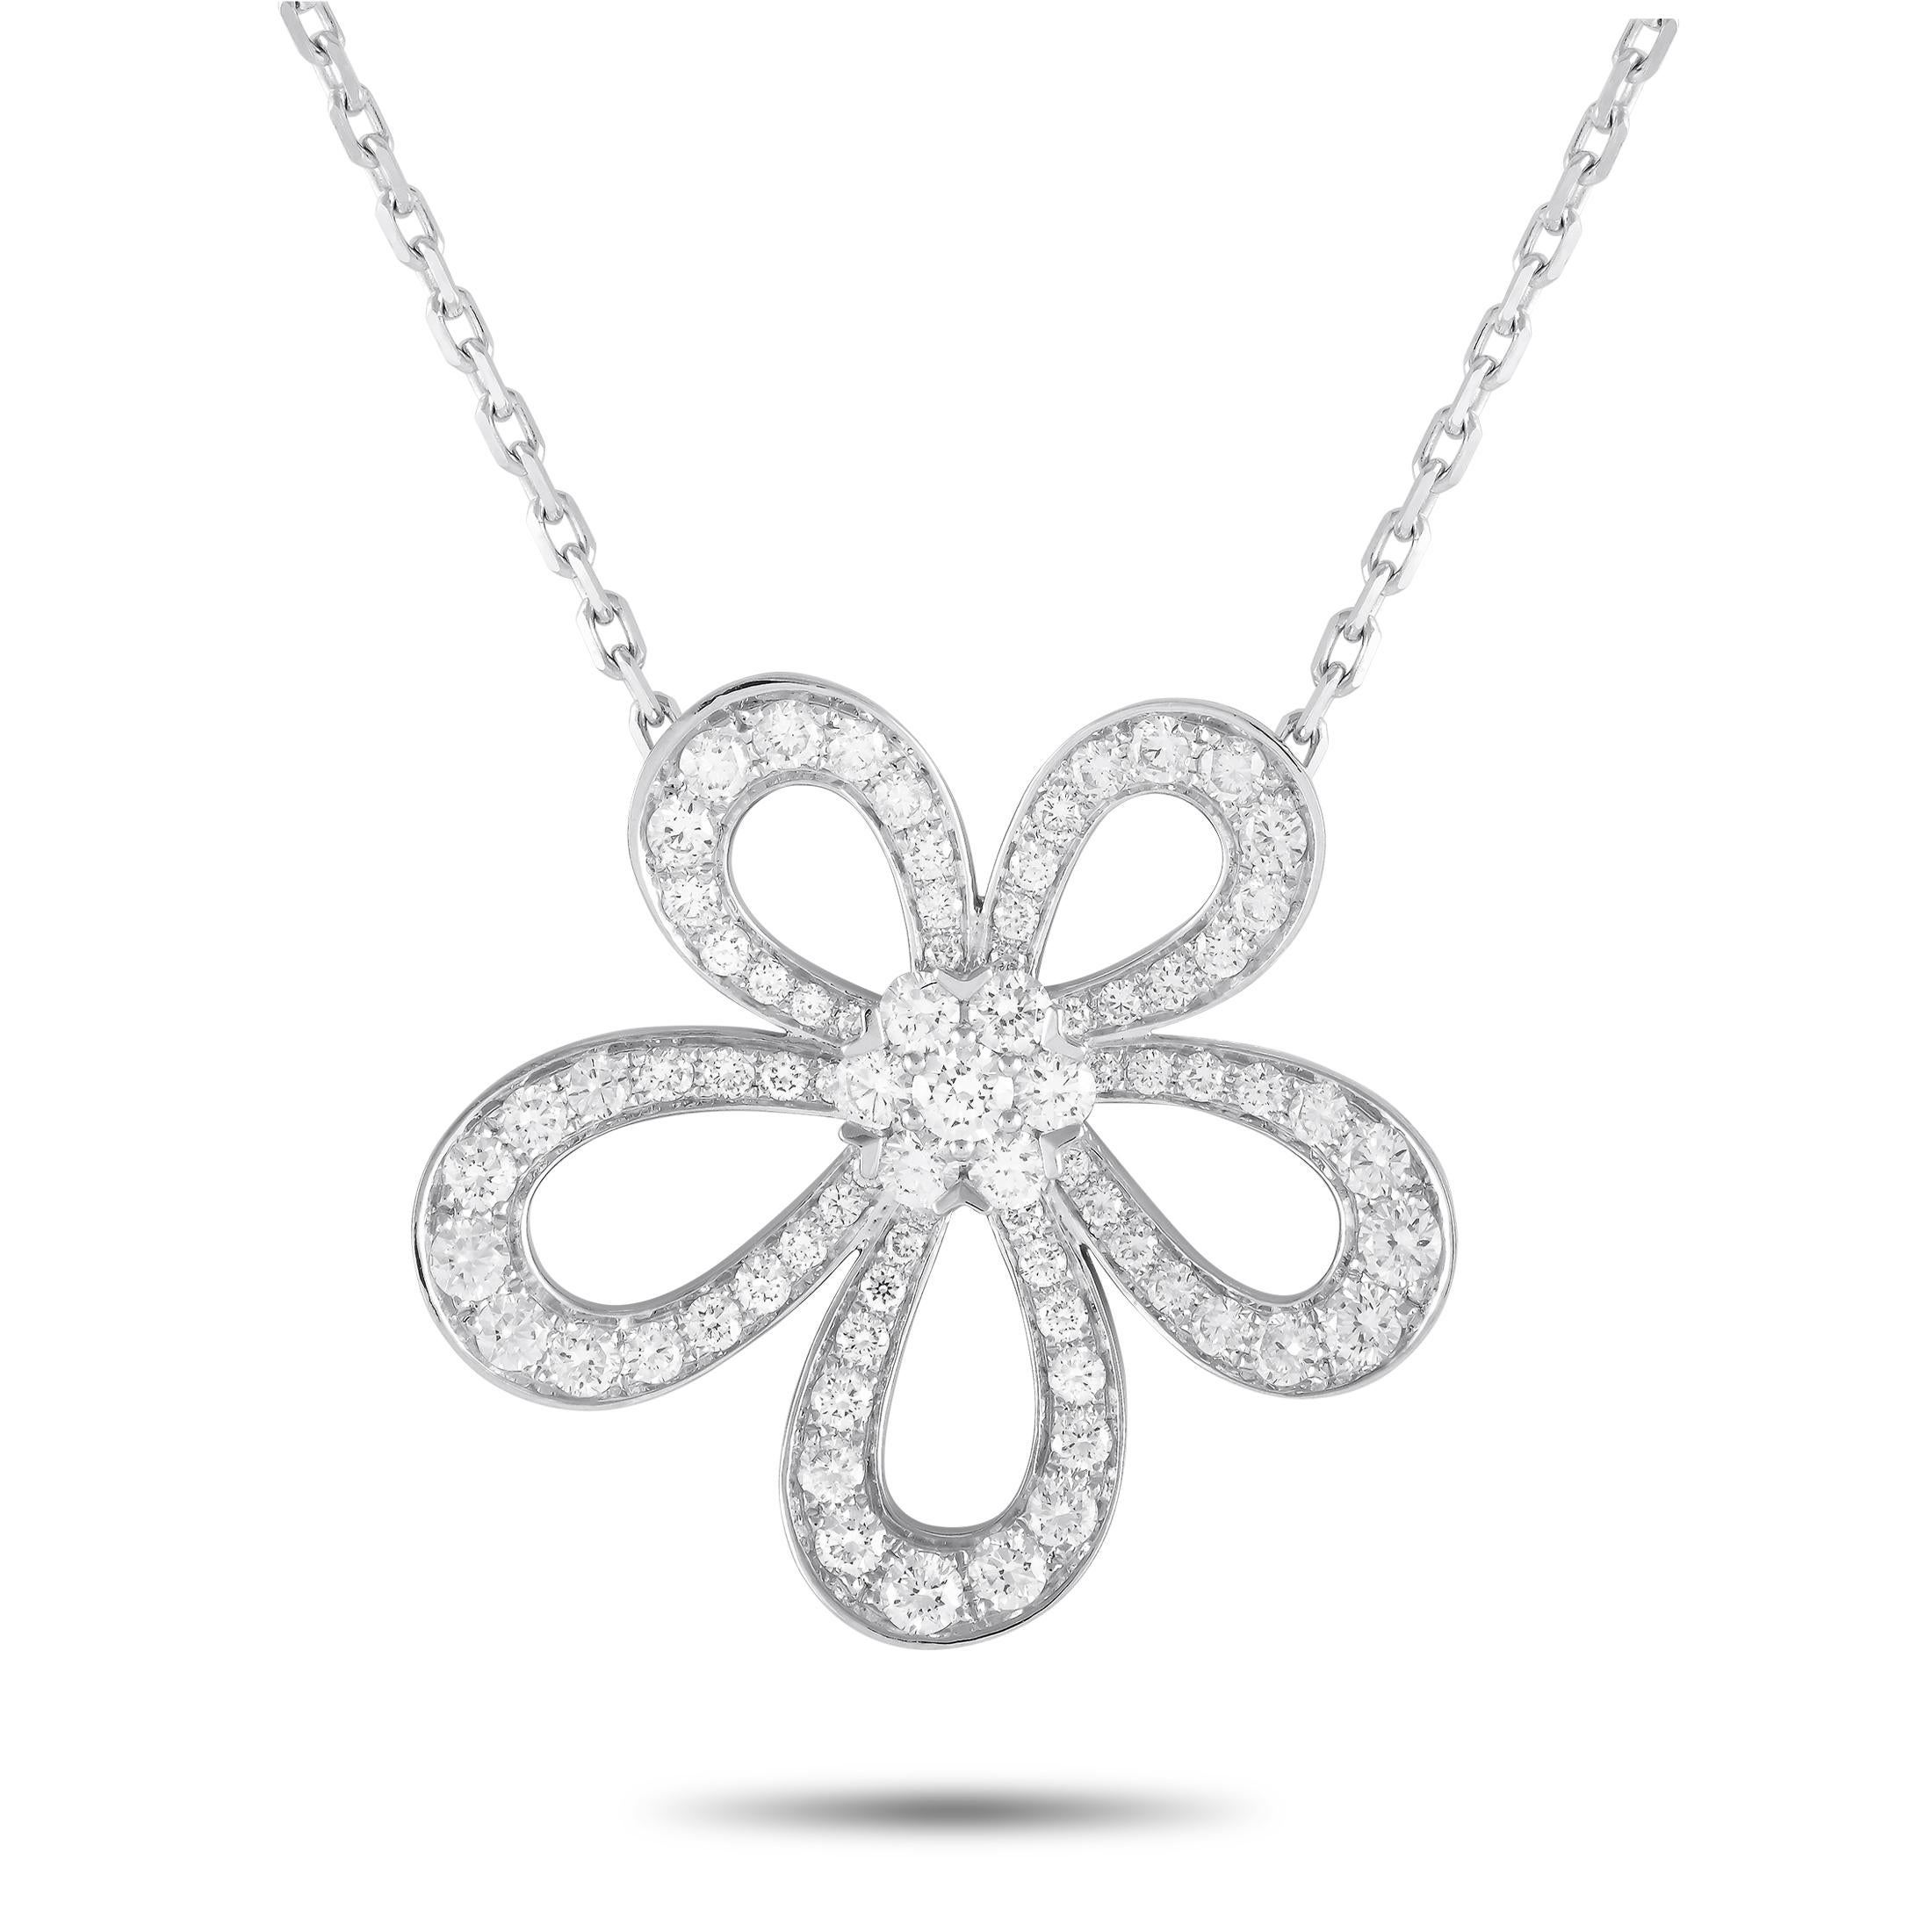 Van Cleef & Arpels Van Cleef & Arpels 18K White Gold 2.37ct Diamond Necklace In Excellent Condition For Sale In Southampton, PA